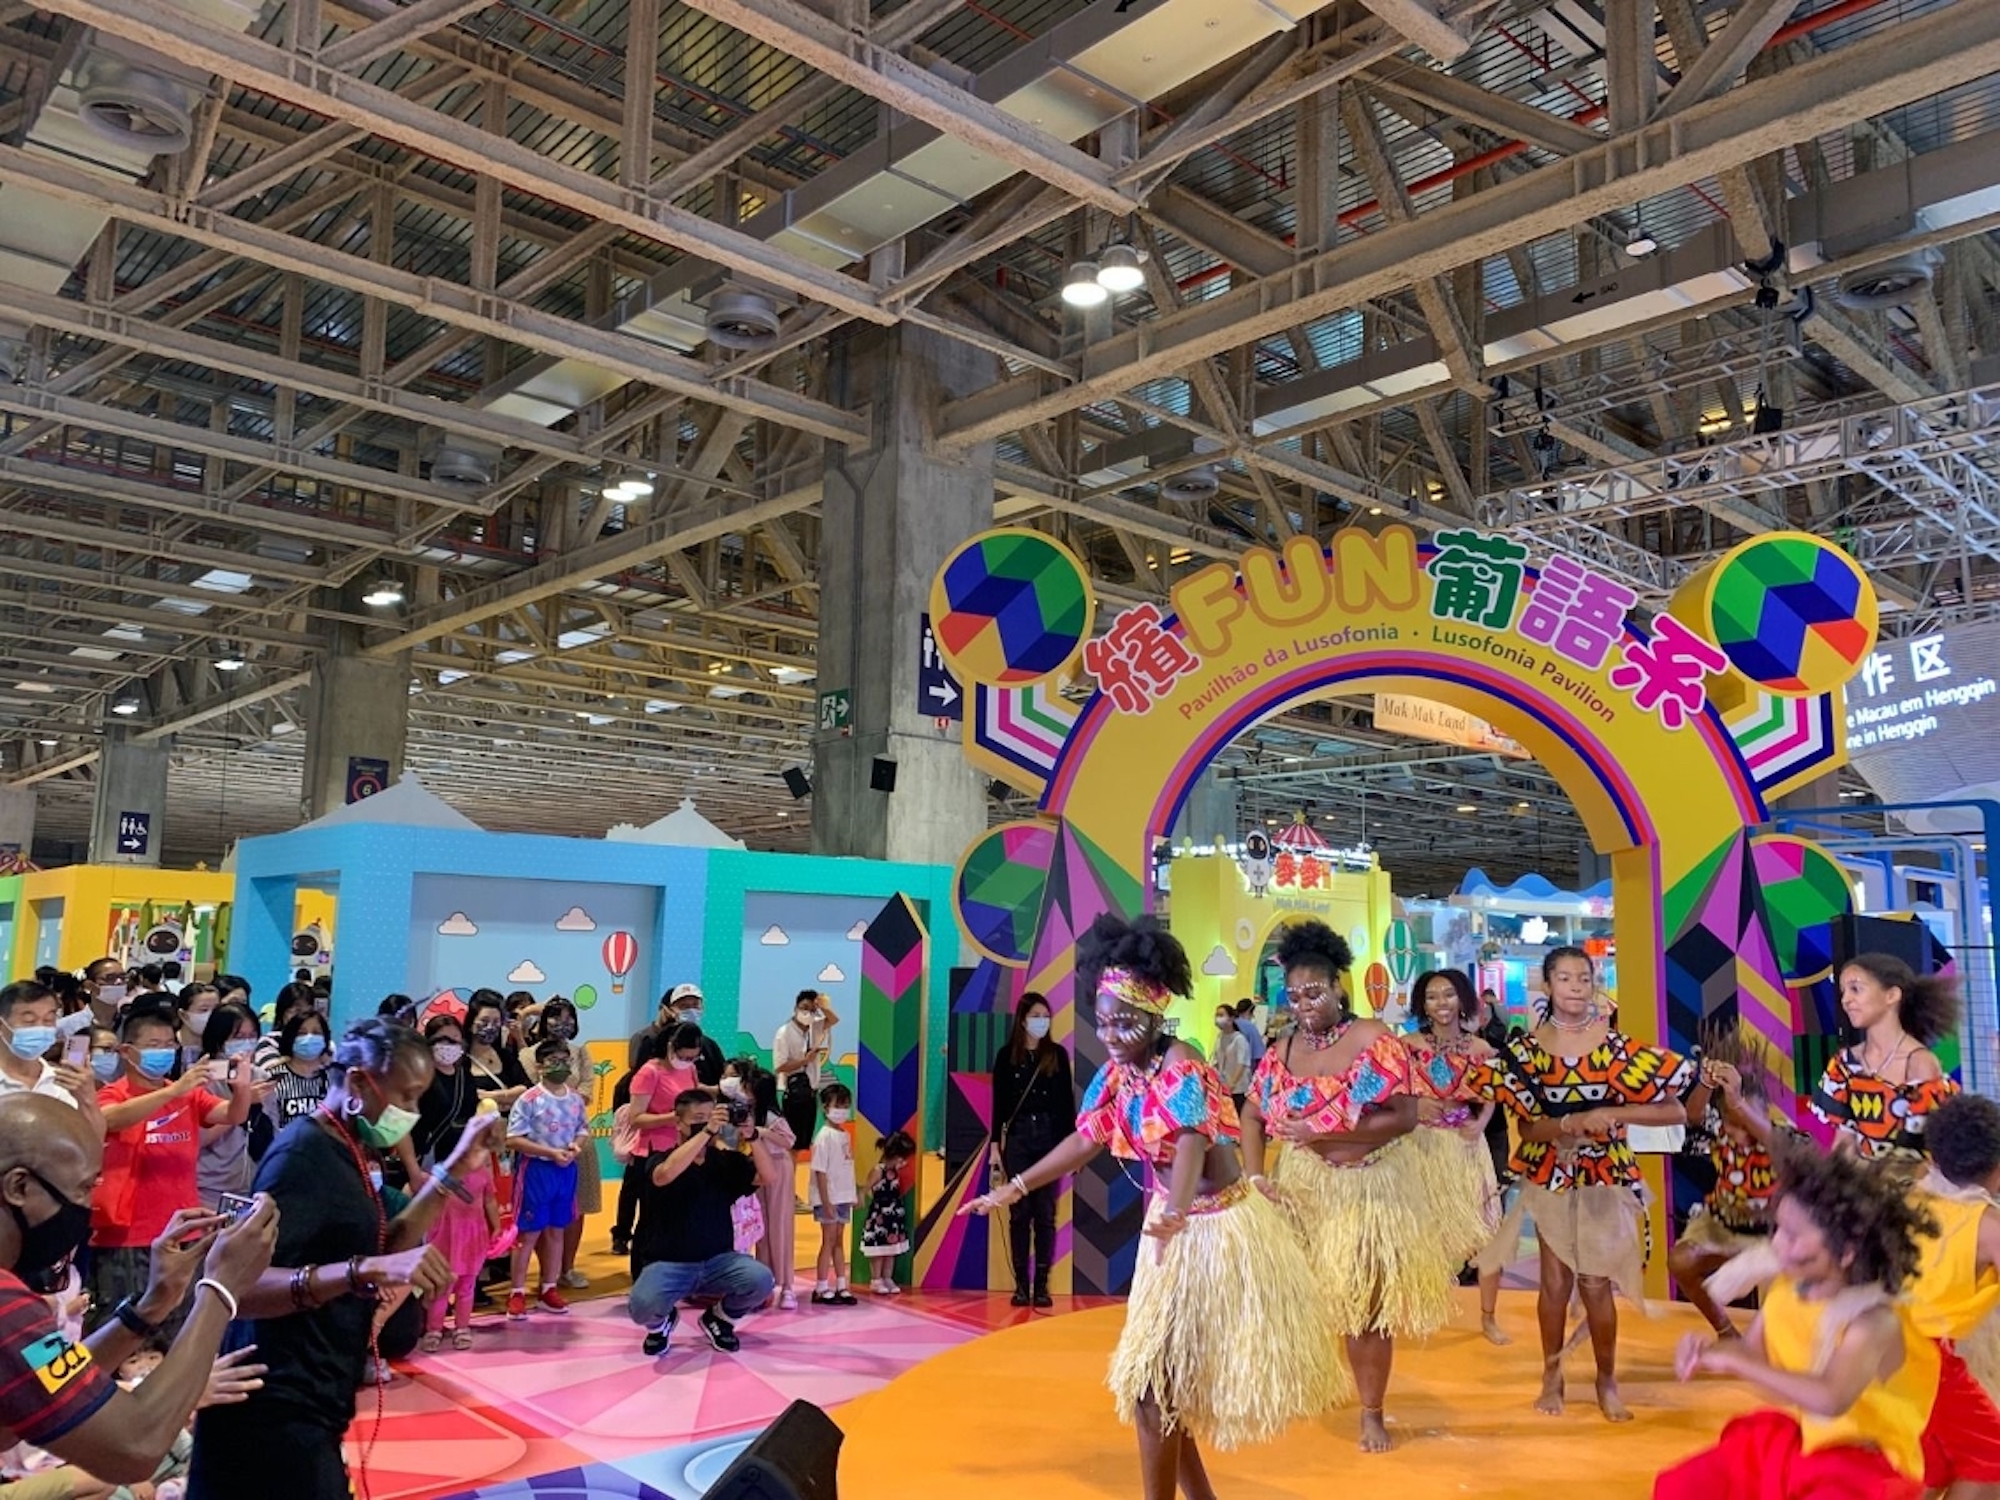 30,000 visitors flock to 10th Macao International Travel Expo